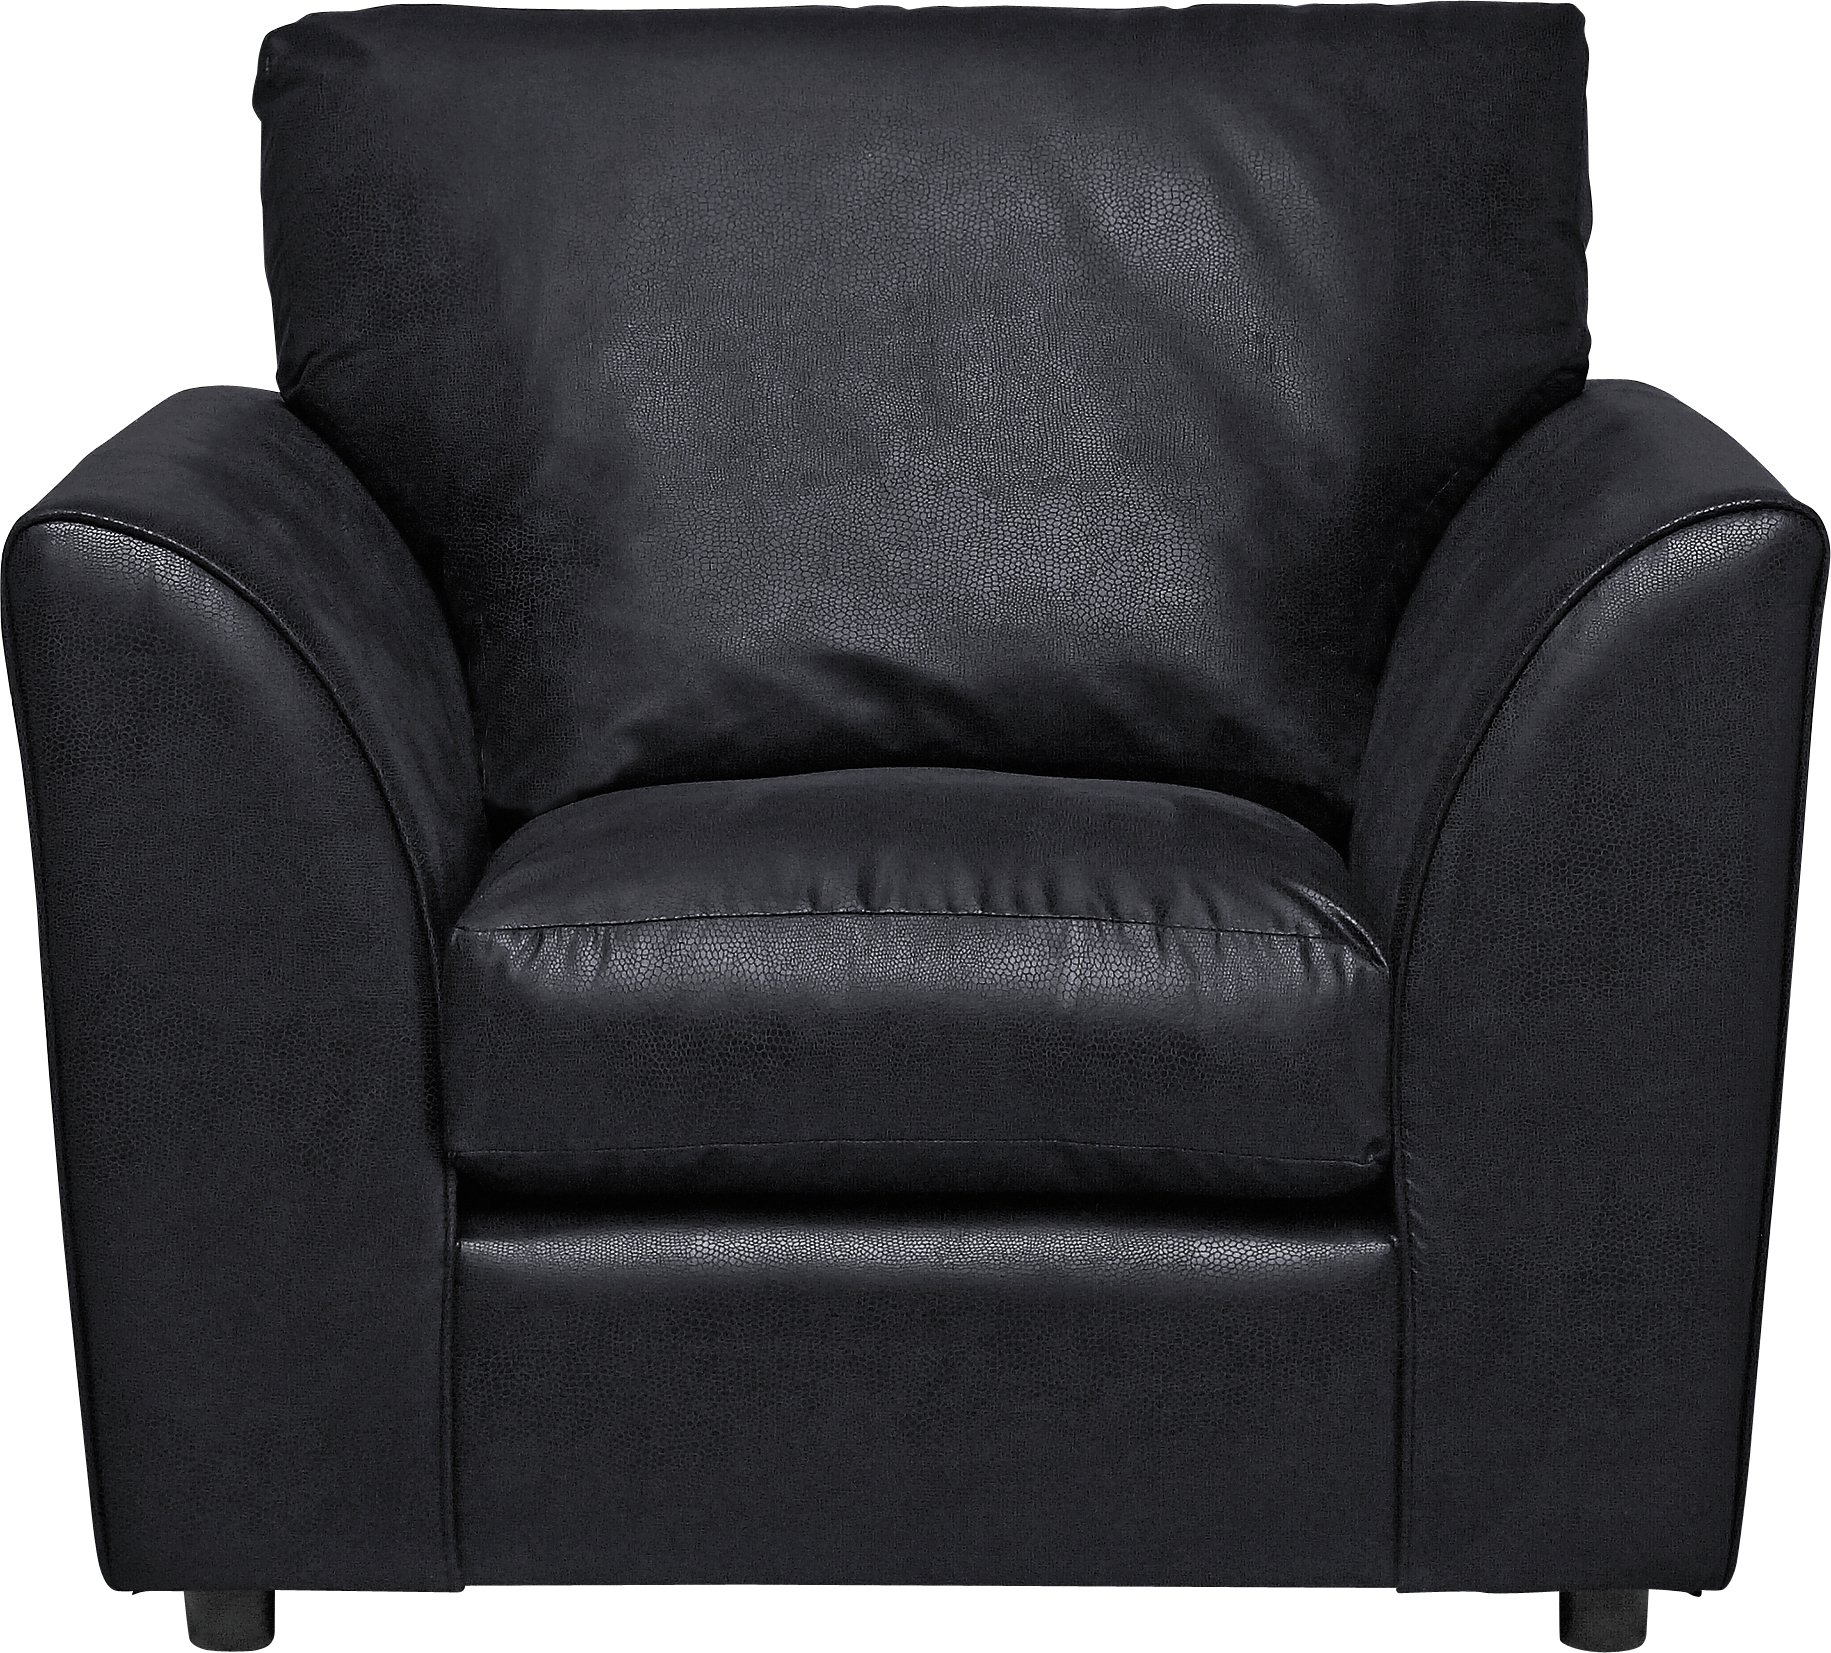 Argos Home New Alfie Leather Effect Chair - Black